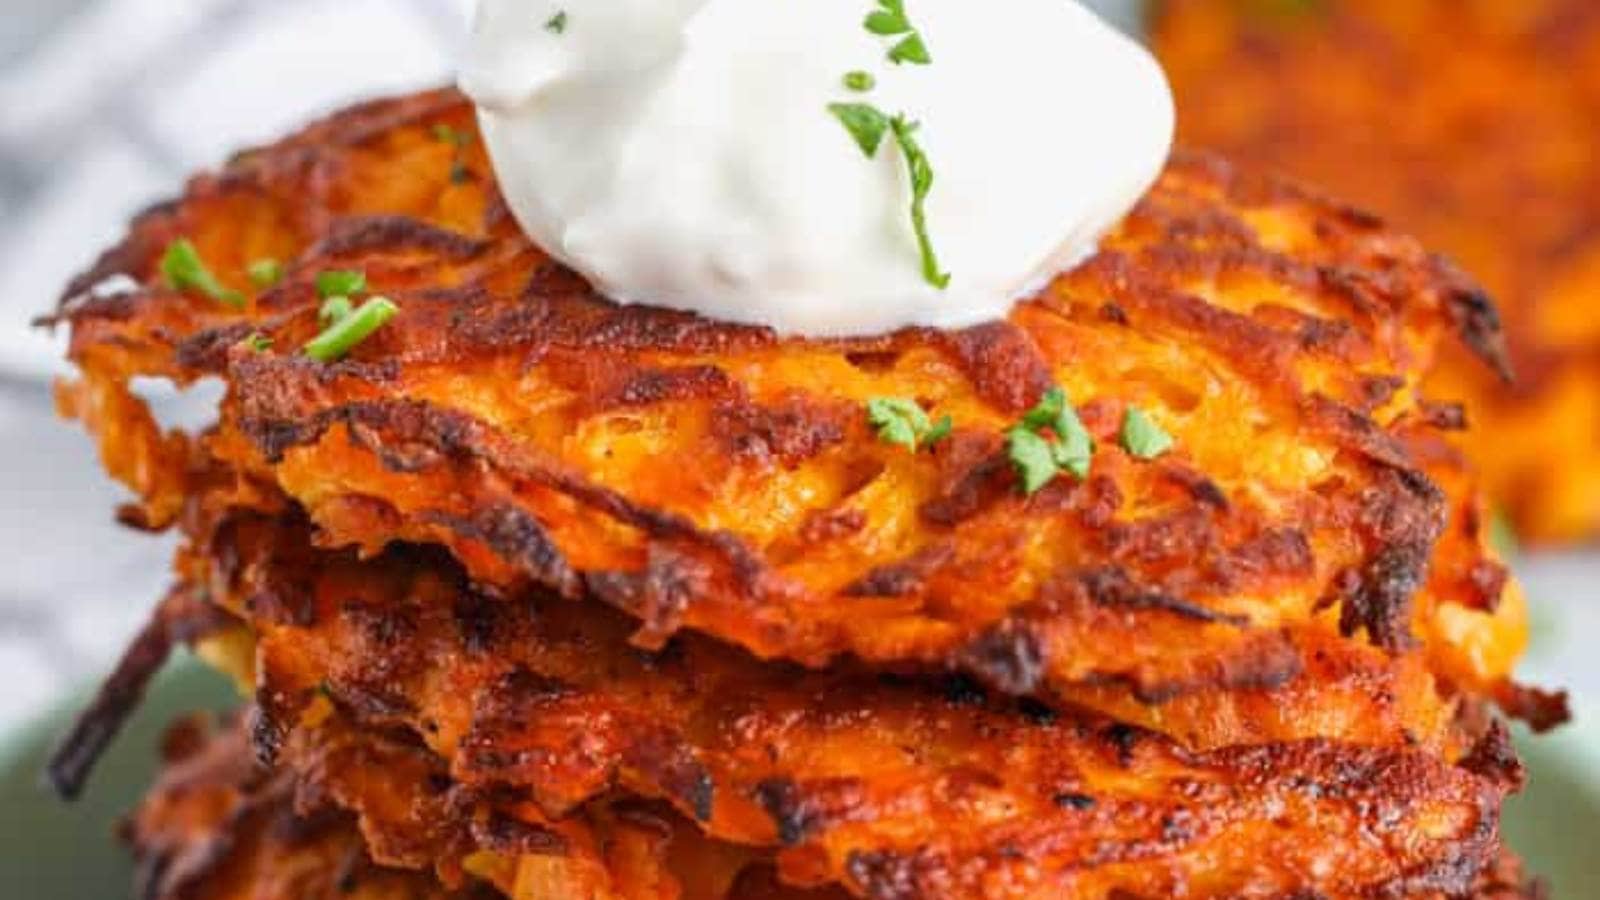 Sweet Potato Hash Browns recipe by Spend With Pennies.